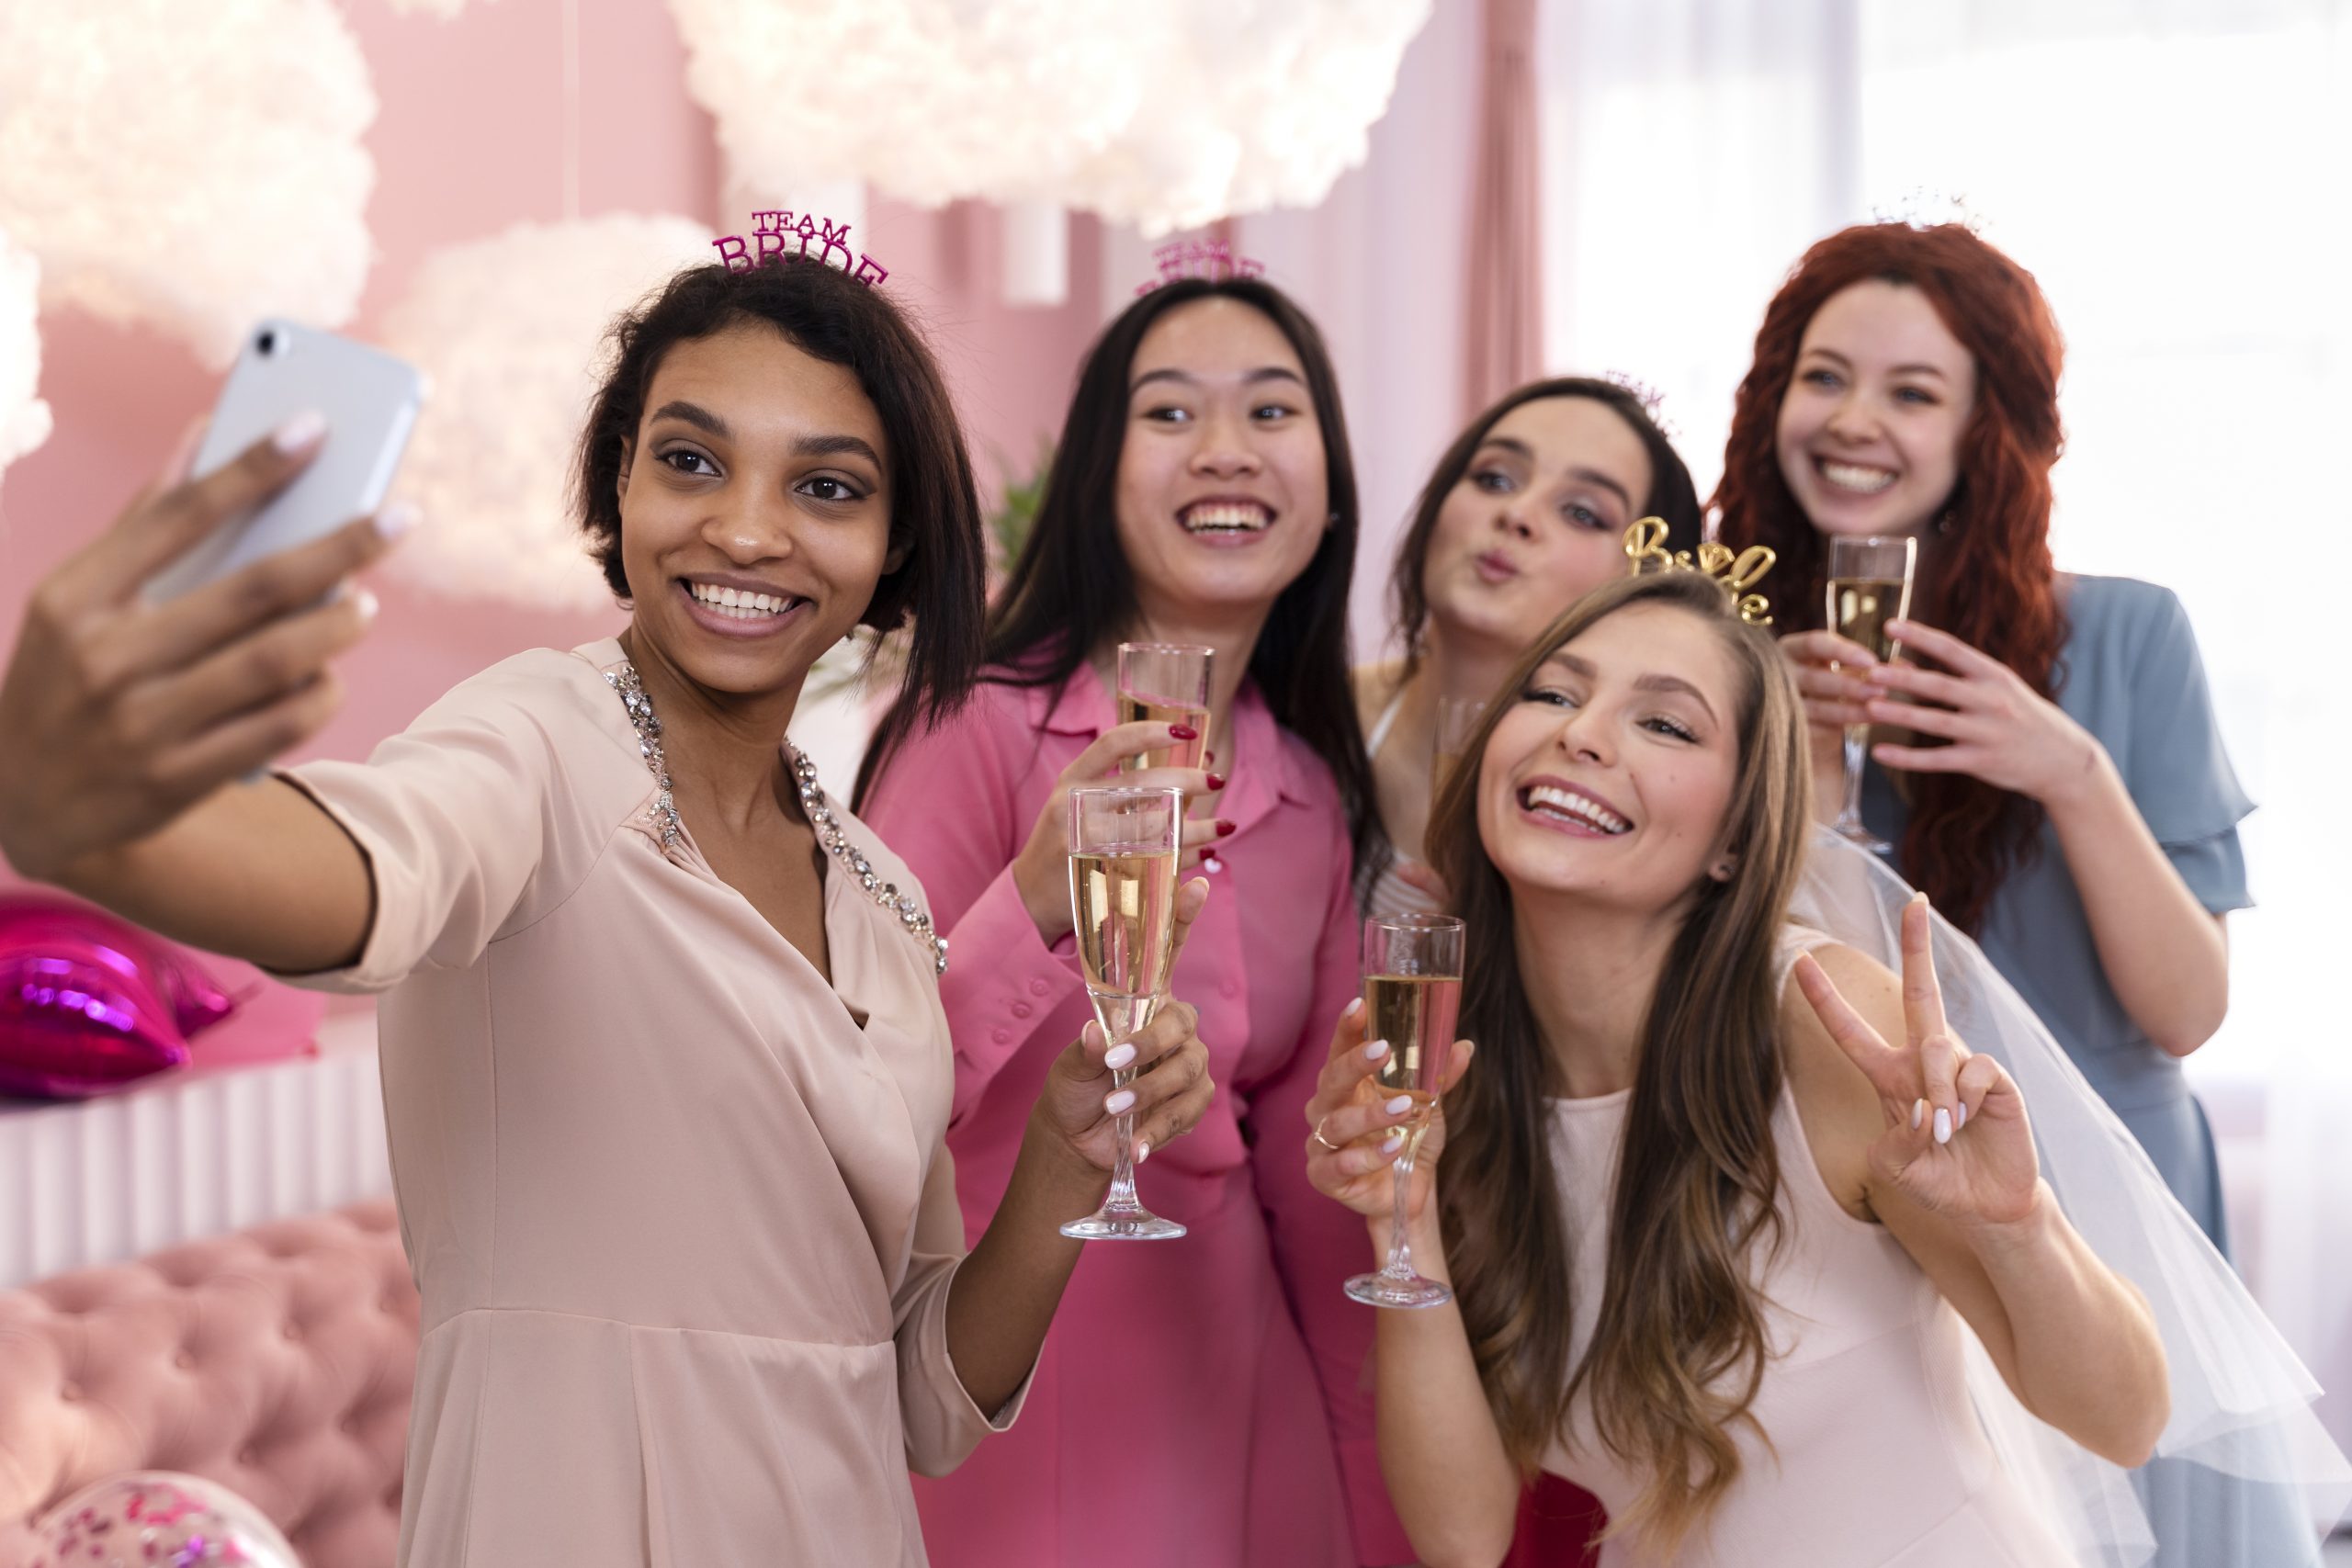 group of women pose for a selfie while toasting with champagne during a scavenger hunt app event. Girl on right is wearing a bride tiara.